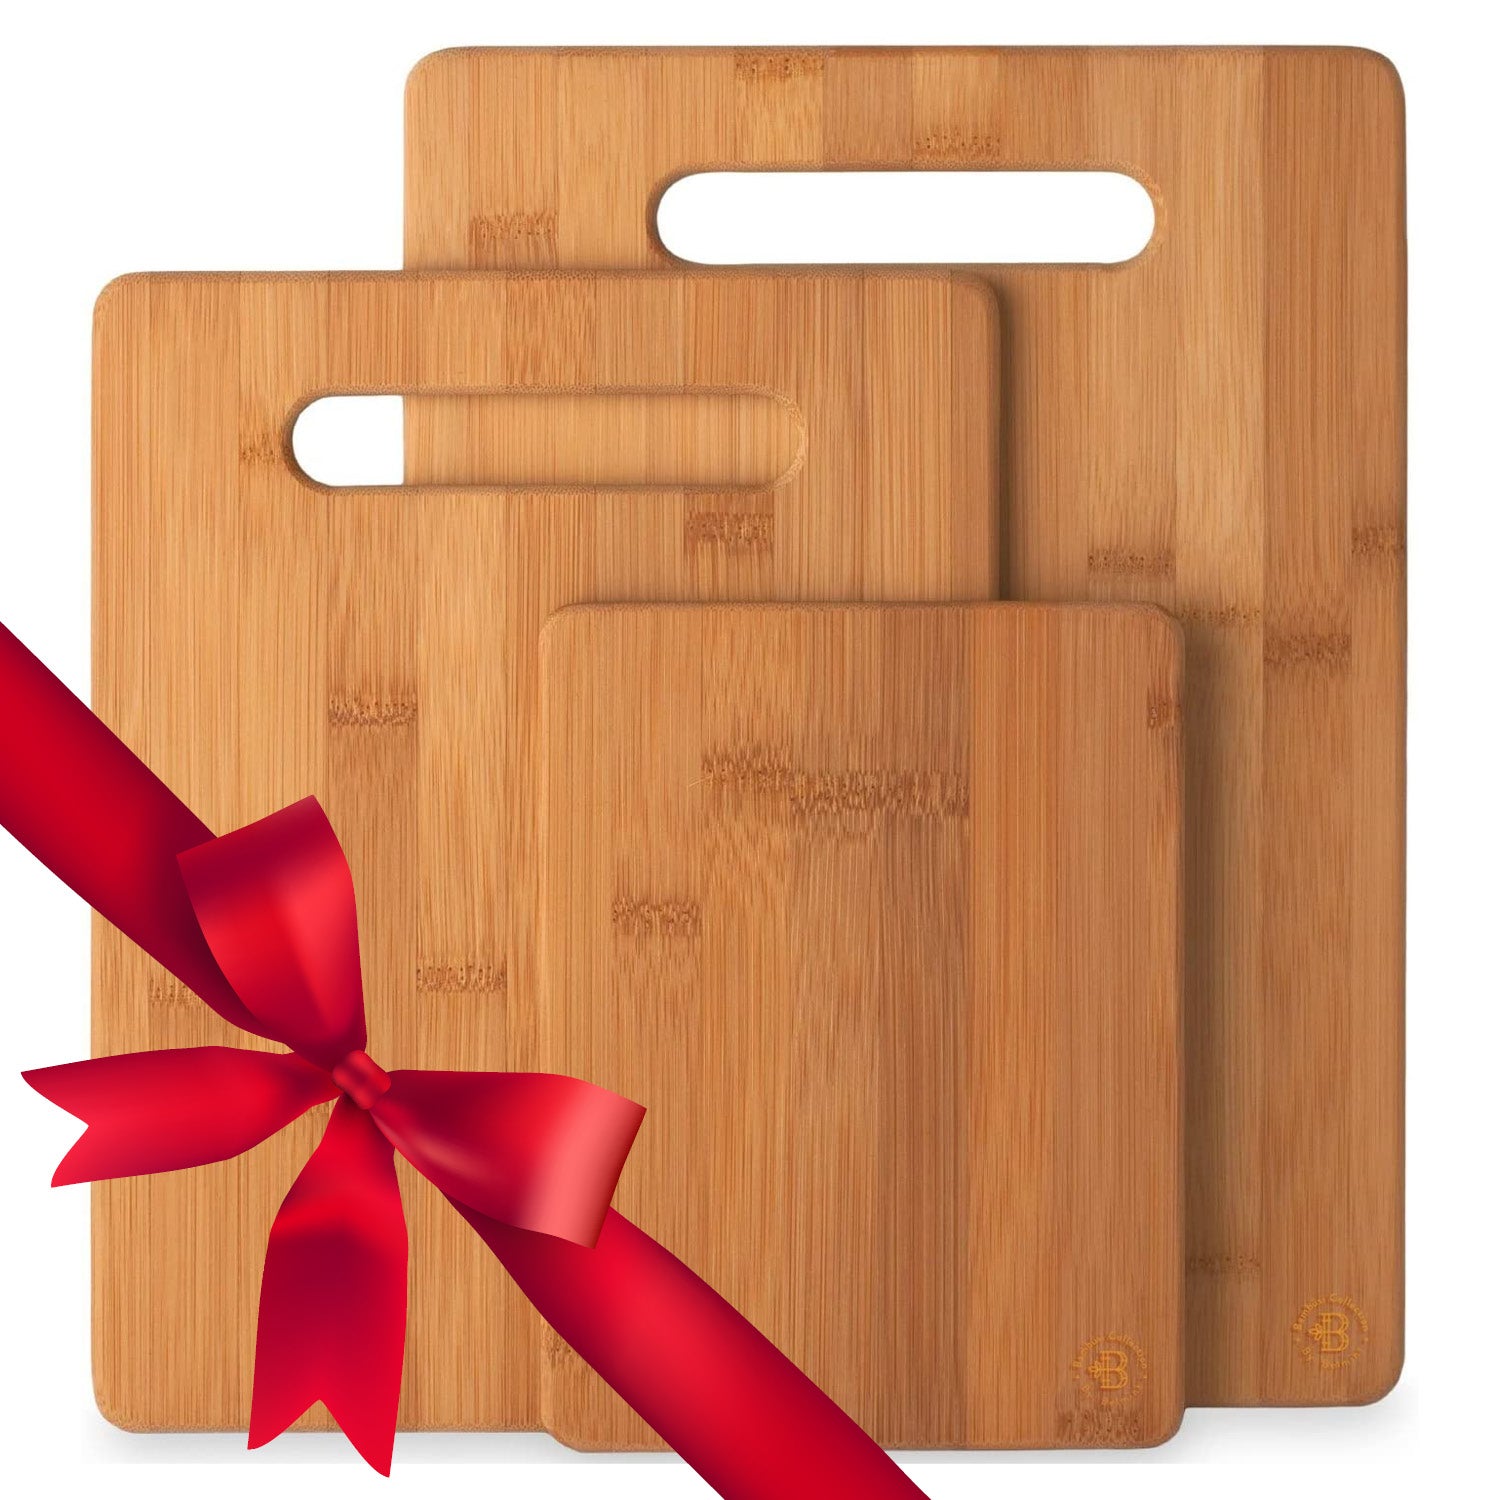 Food Network CookingGreen Bamboo Cutting Board Set - 3 count